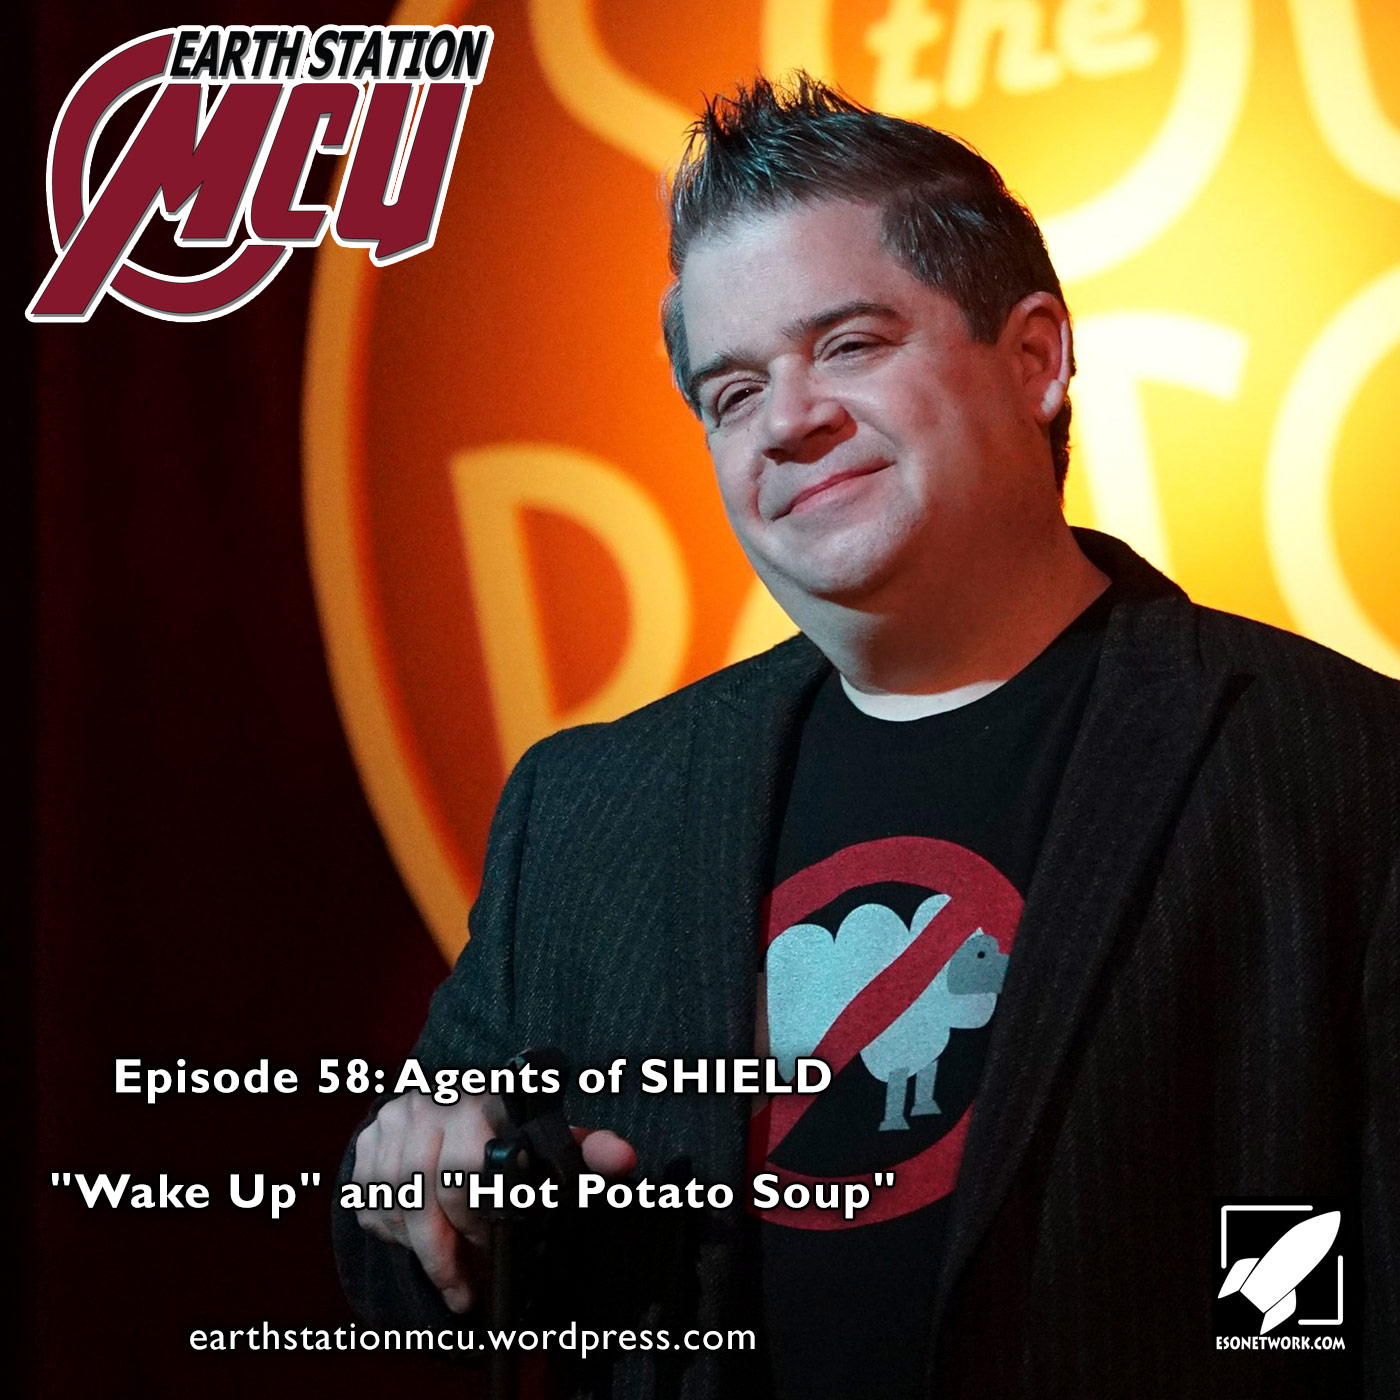 Earth Station MCU Episode 58: Agents of SHIELD ”Wake Up” and ”Hot Potato Soup”